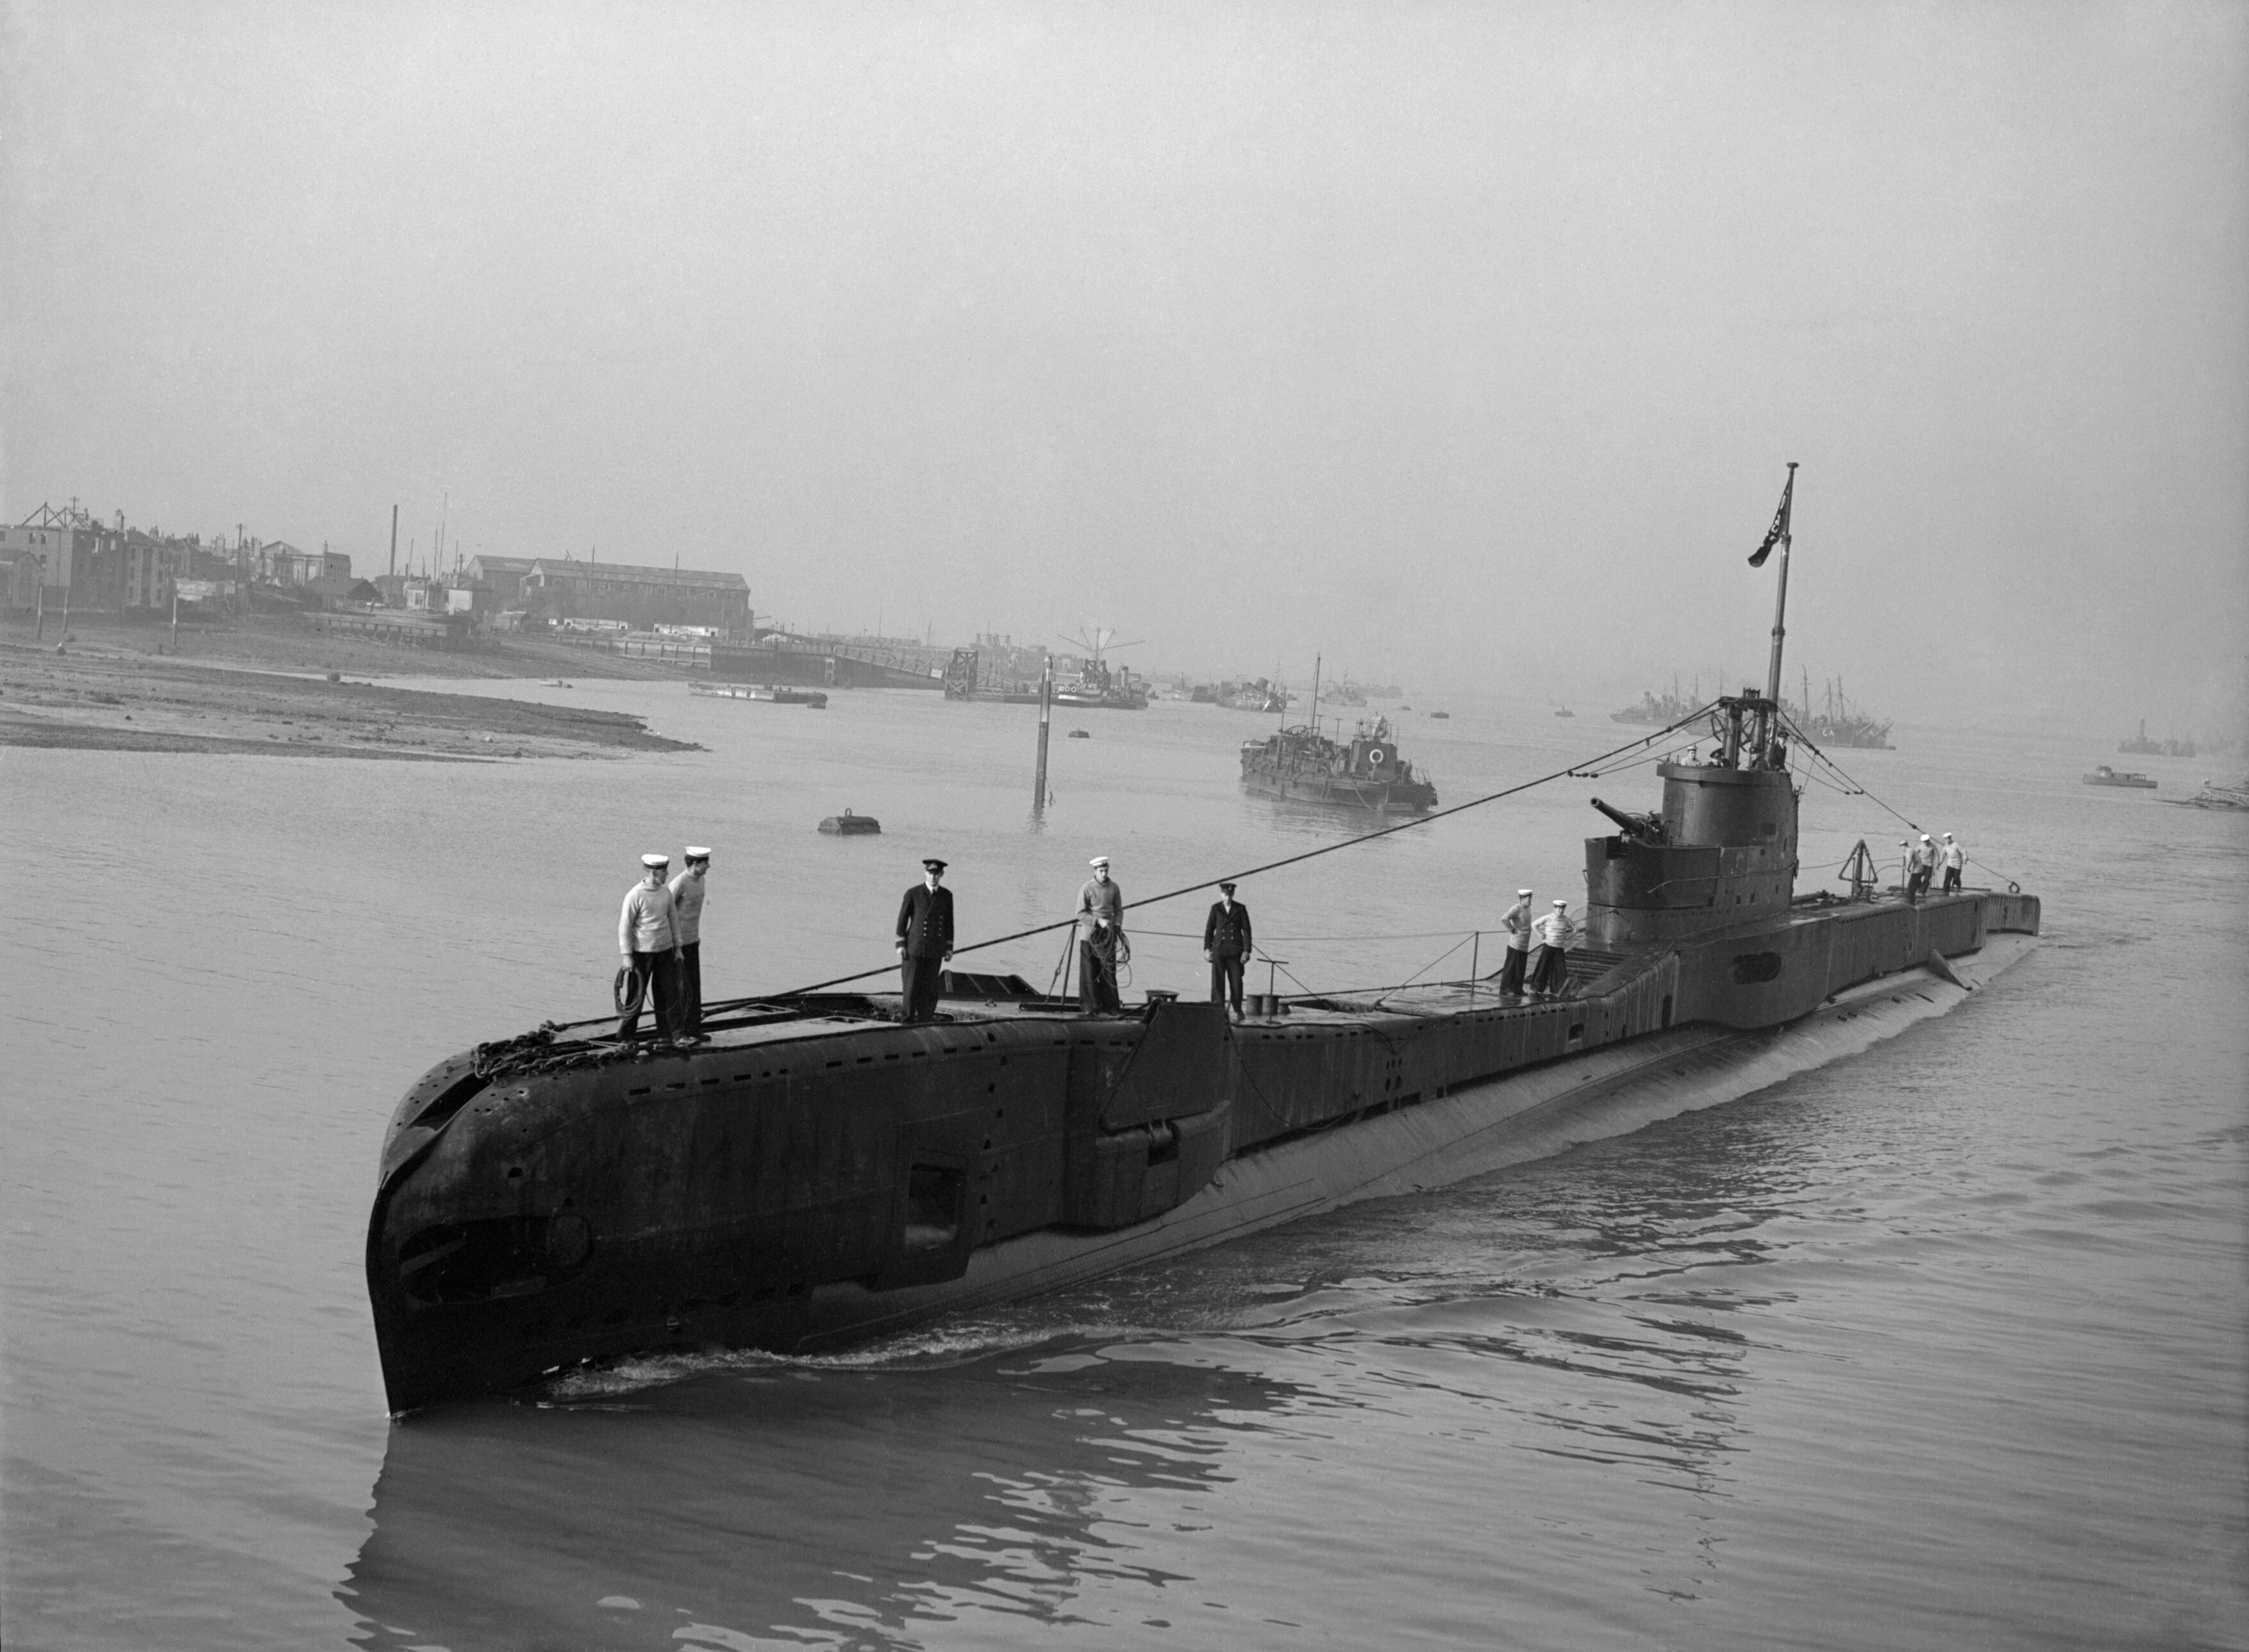 HMS Taku come back home after a long service (Imperial War Museums public domain)